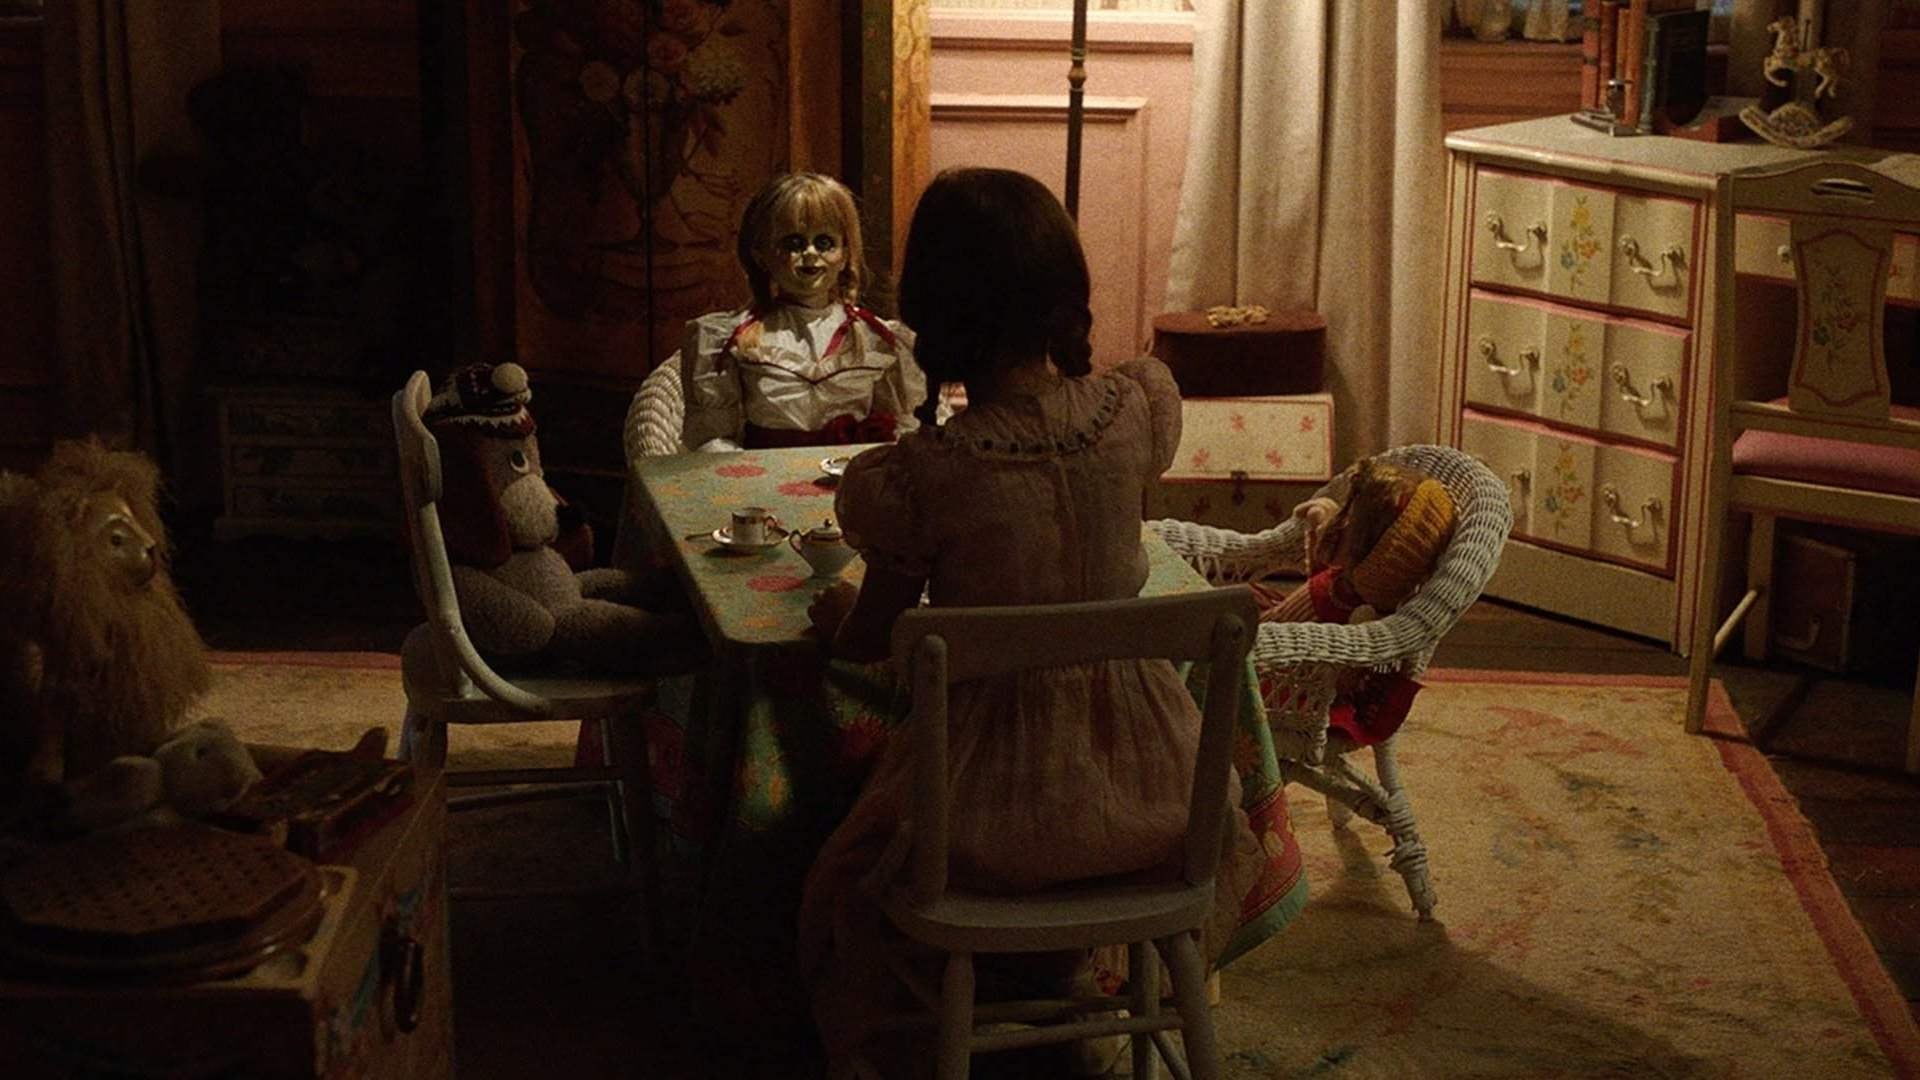 Screenshot from the film Annabelle: Creation. A young girl has a tea party with a stuffed dog, a doll, and a sinister looking doll.